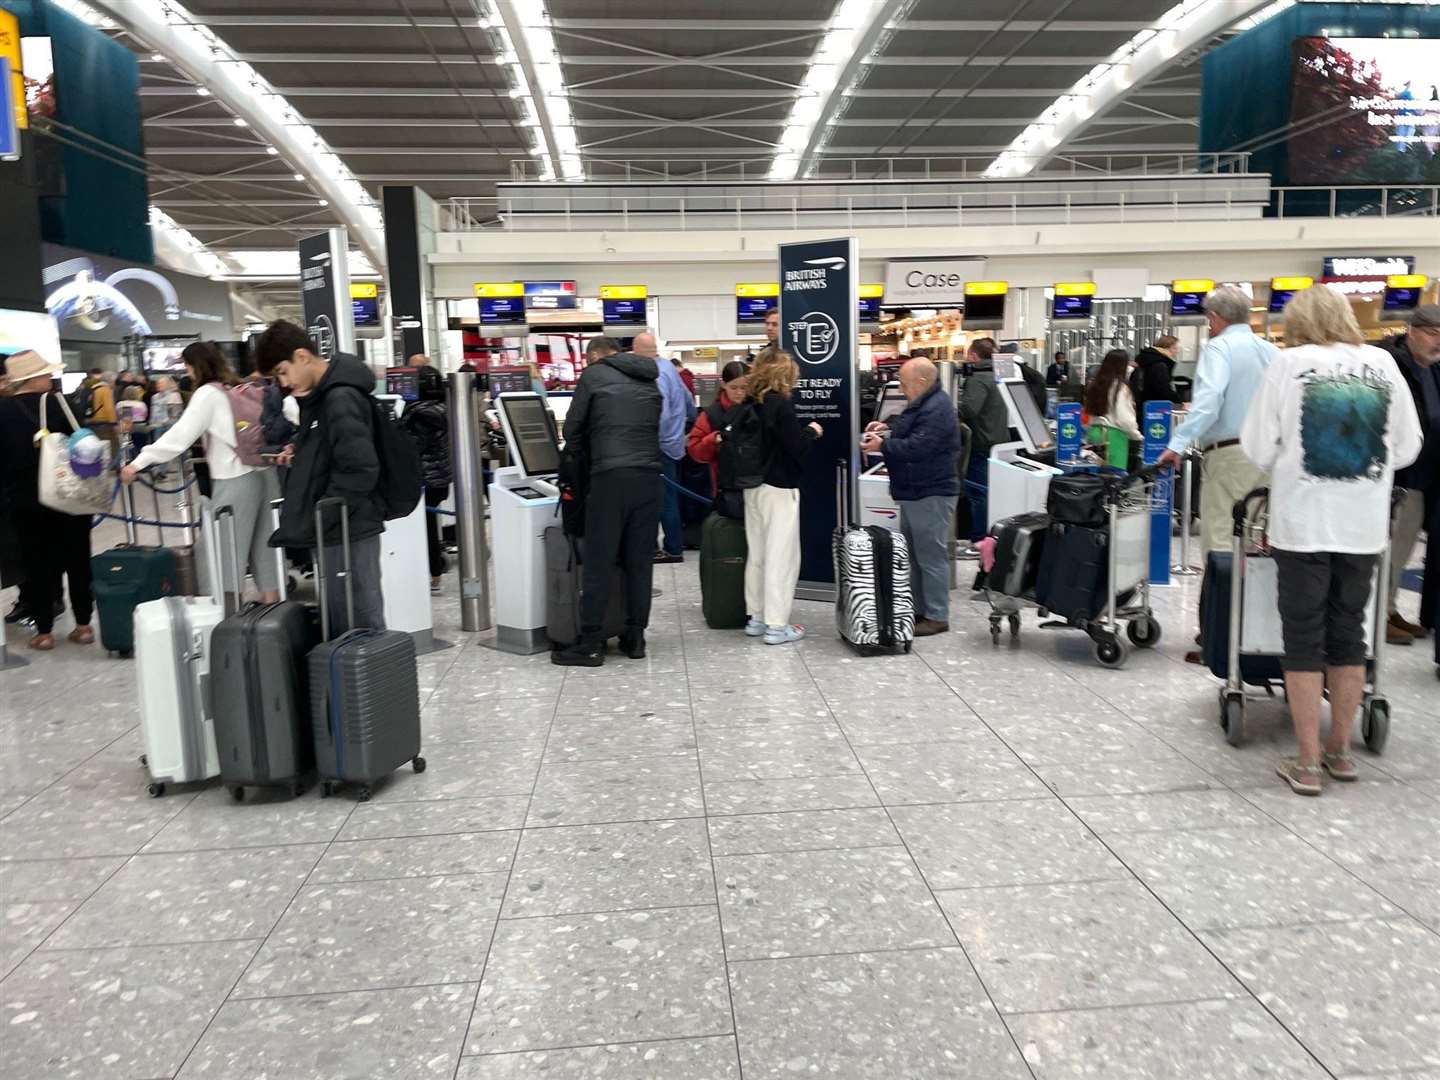 Passengers stuck in the UK and abroad described their frustration, as some had no idea when or how they would get to their destination (Jordan Pettitt/PA)